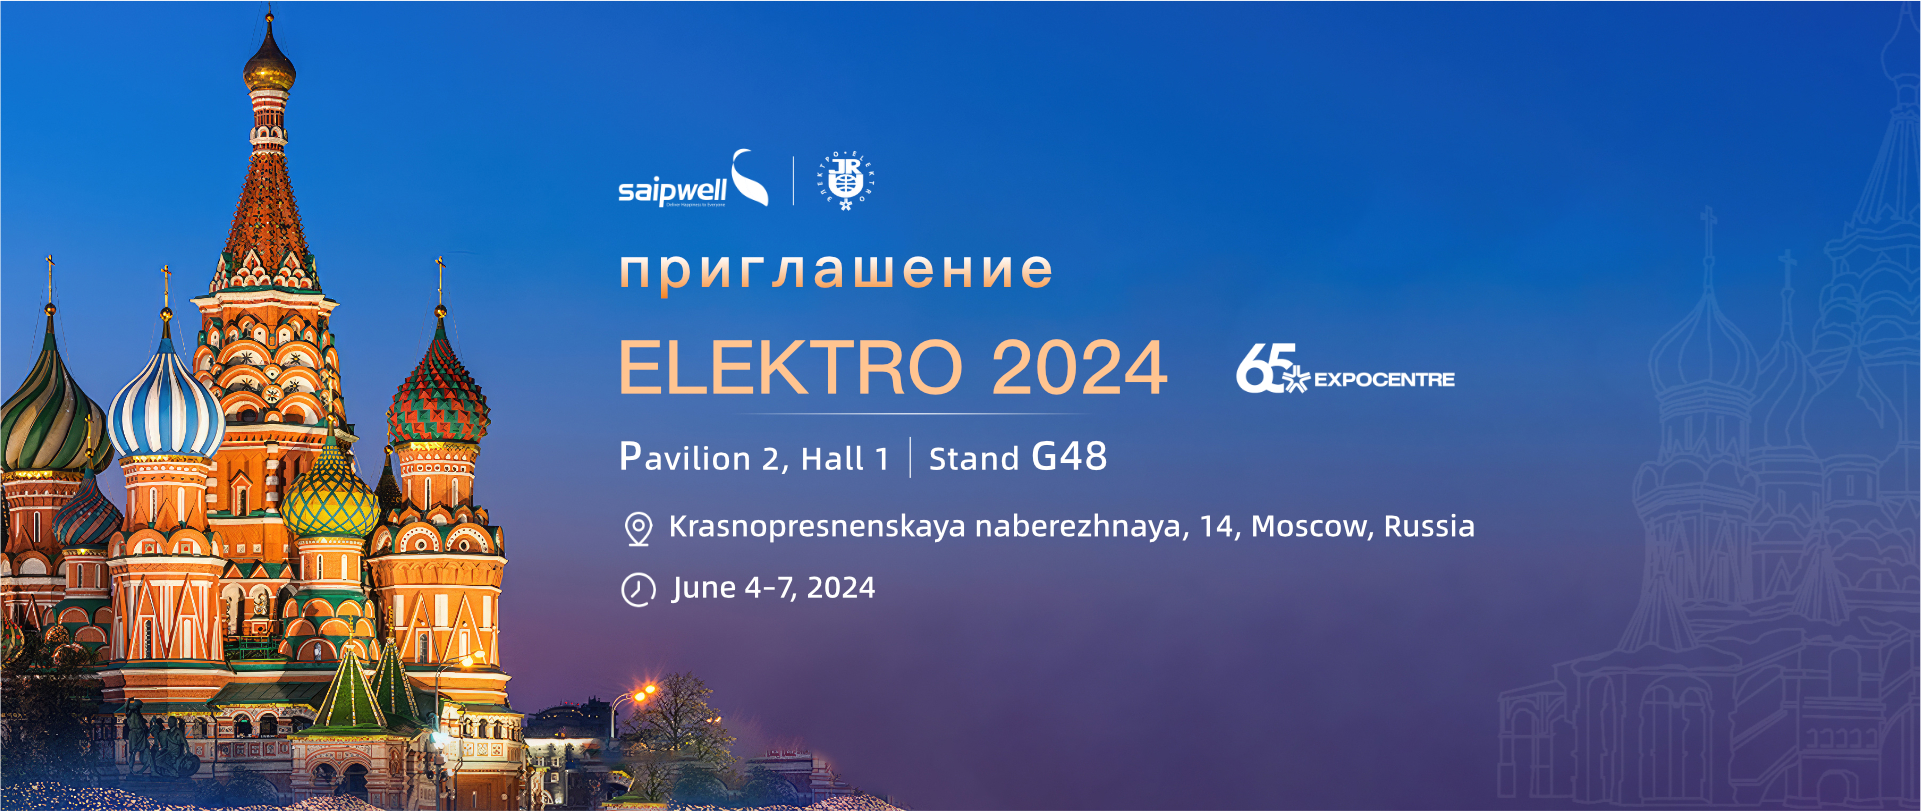 Saipwell Waterproof Electrical Appliance Manufacturing Company will participate in the Moscow Exhibition in Russia on June 4th